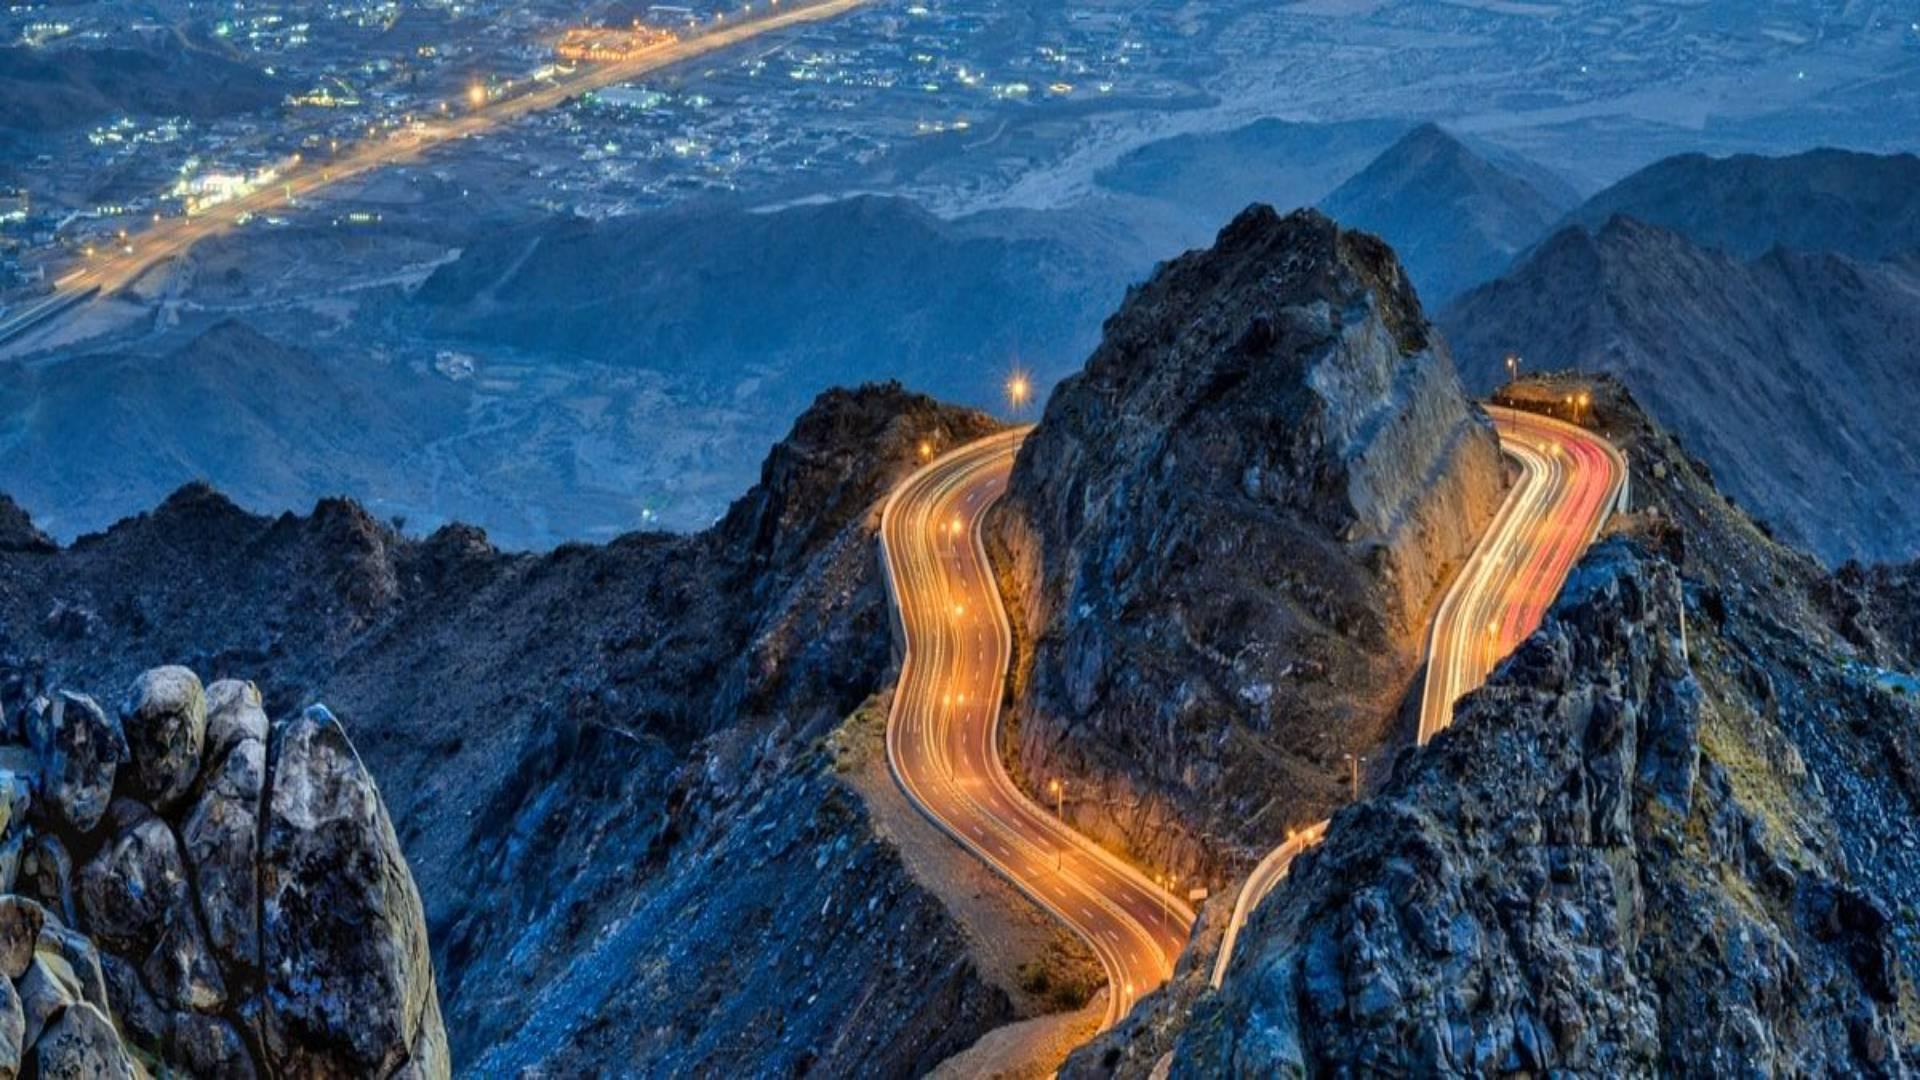 Two new IHG hotels in Taif will boast magical mountain views